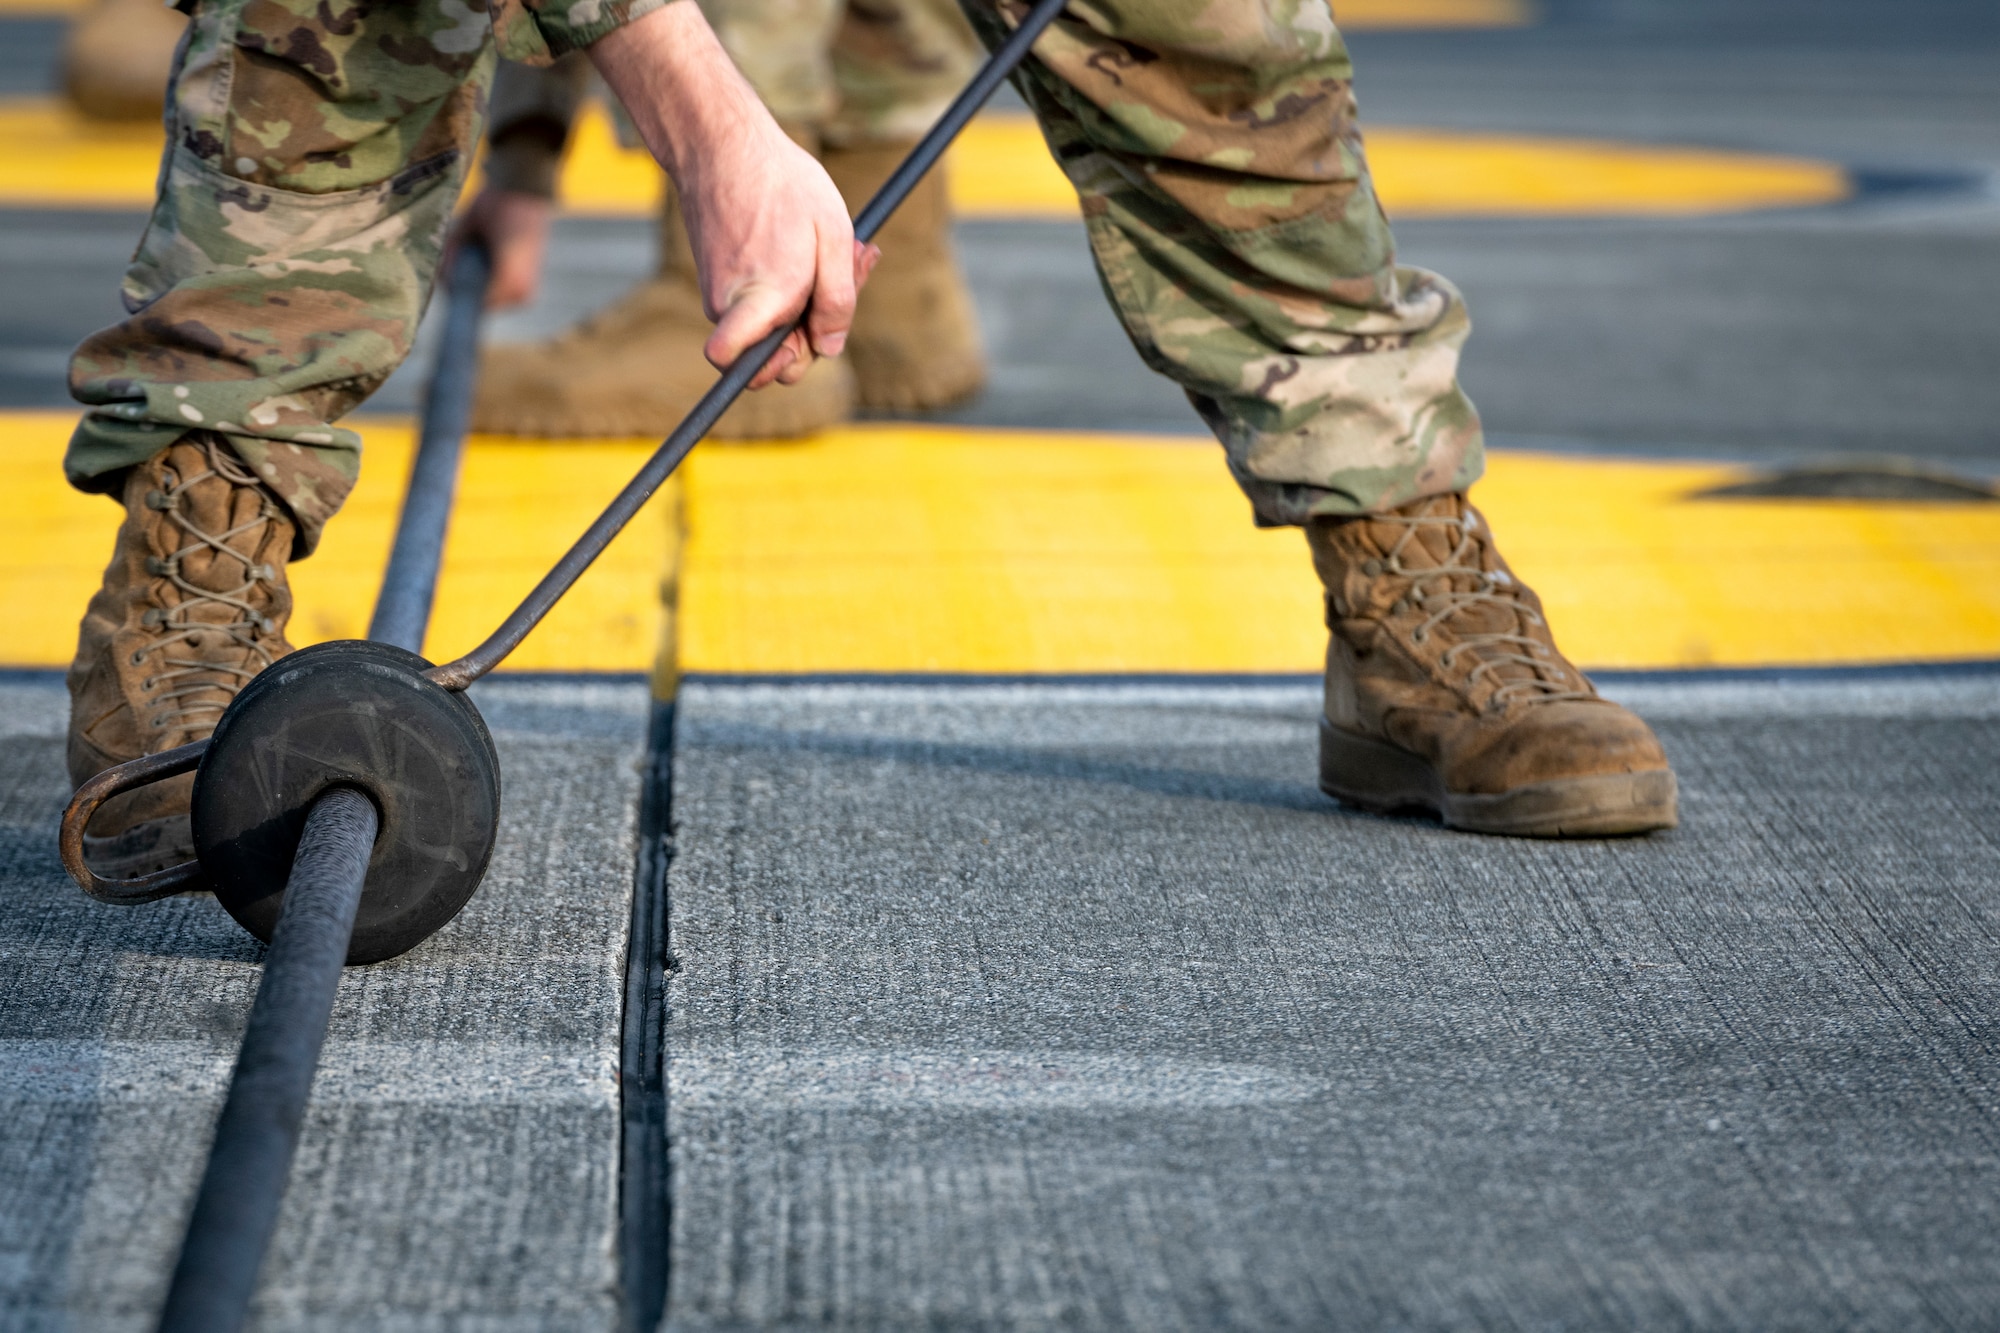 Senior Airman Jacob Handler, 374th Civil Engineer Squadron power production journeyman, ensures precise spacing in-between cable donuts prior to the annual certification test of the Aircraft Arresting System (AAS) at Yokota Air Base, Japan, Jan. 6, 2023.